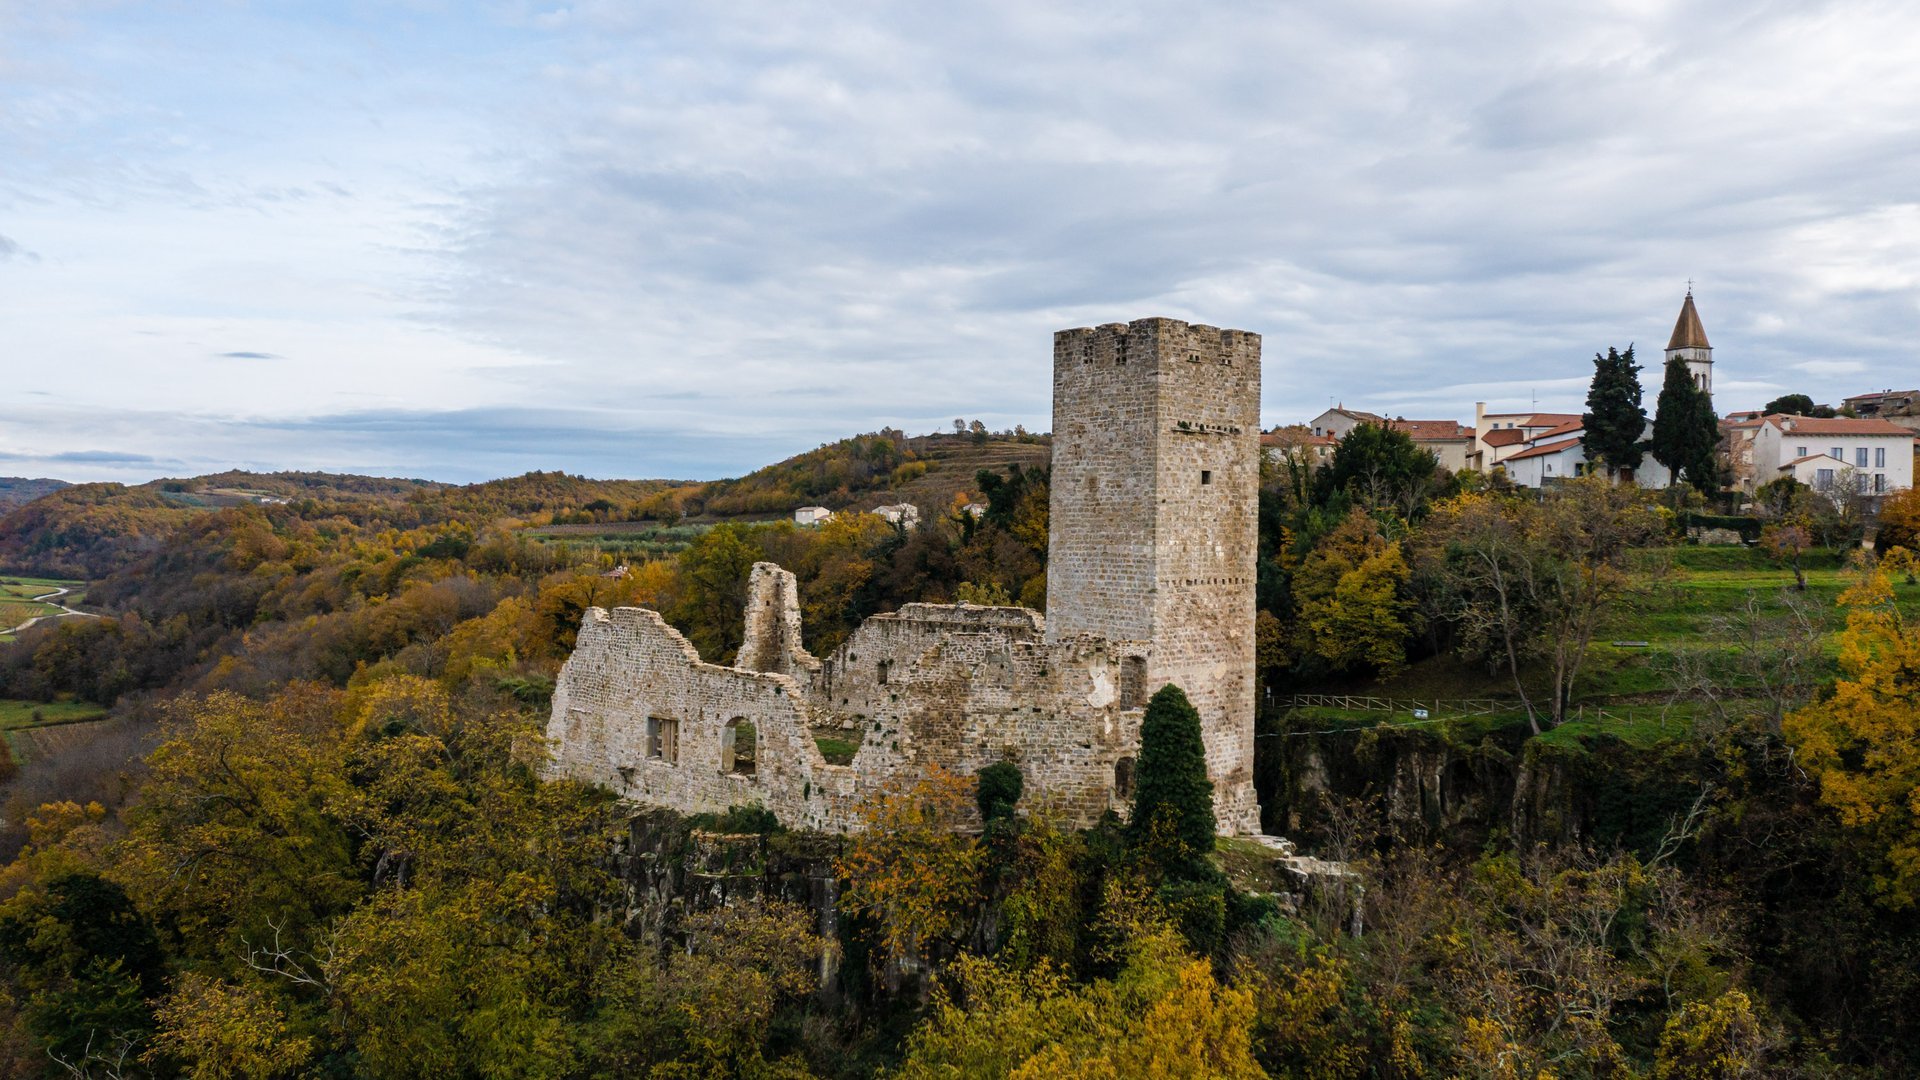 Istria brings together all the most beautiful things you could wish for in life